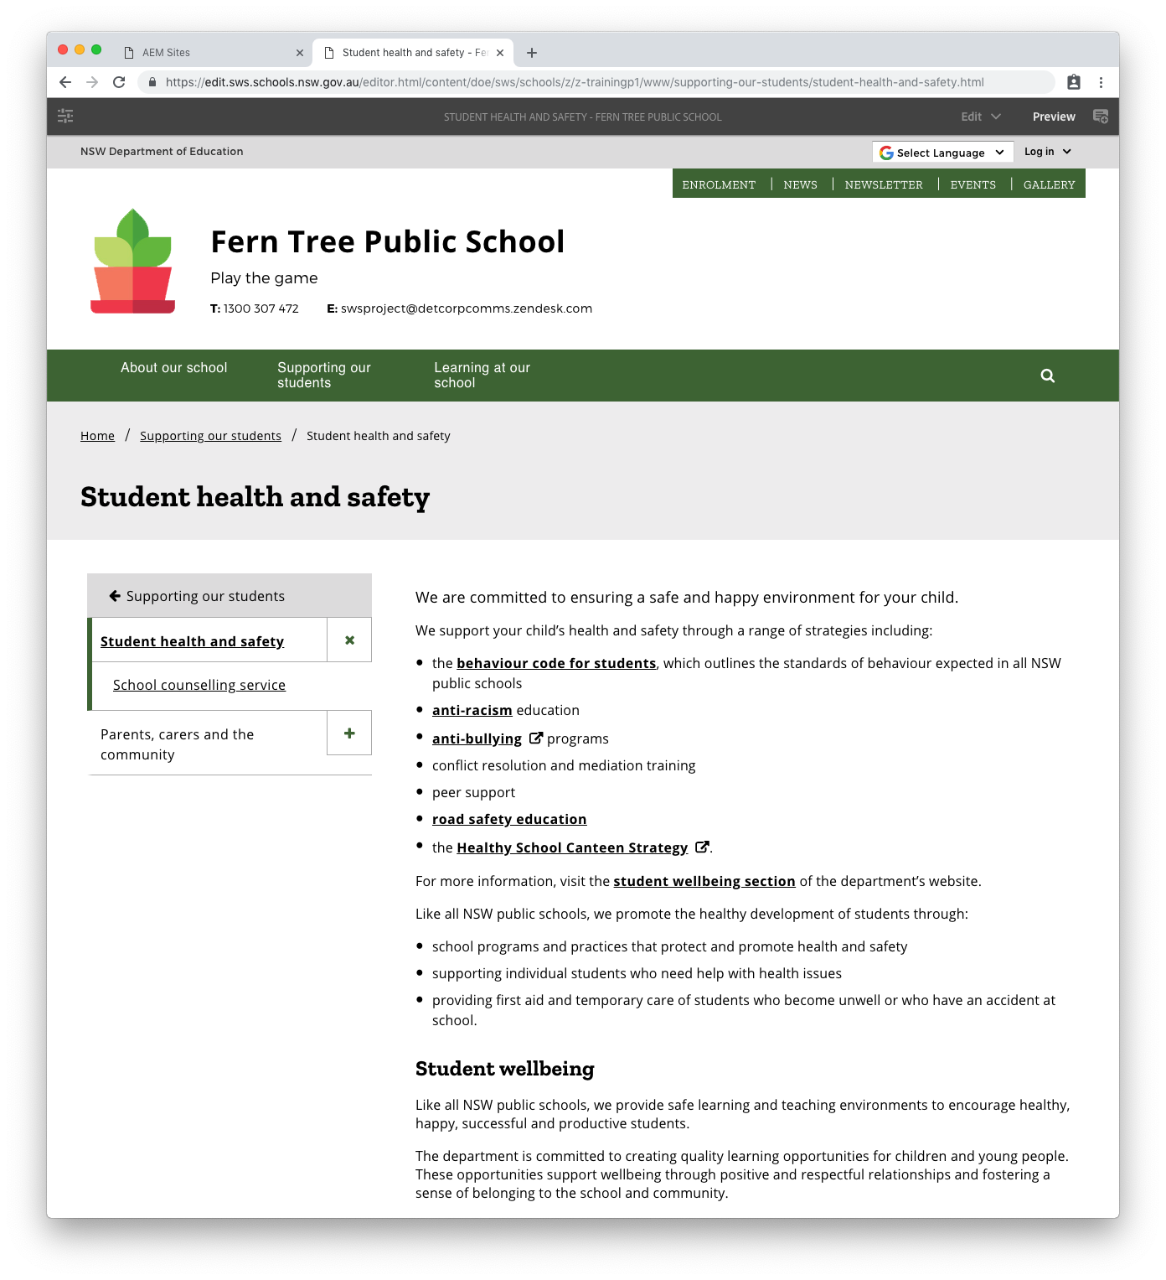 Student health and safety page